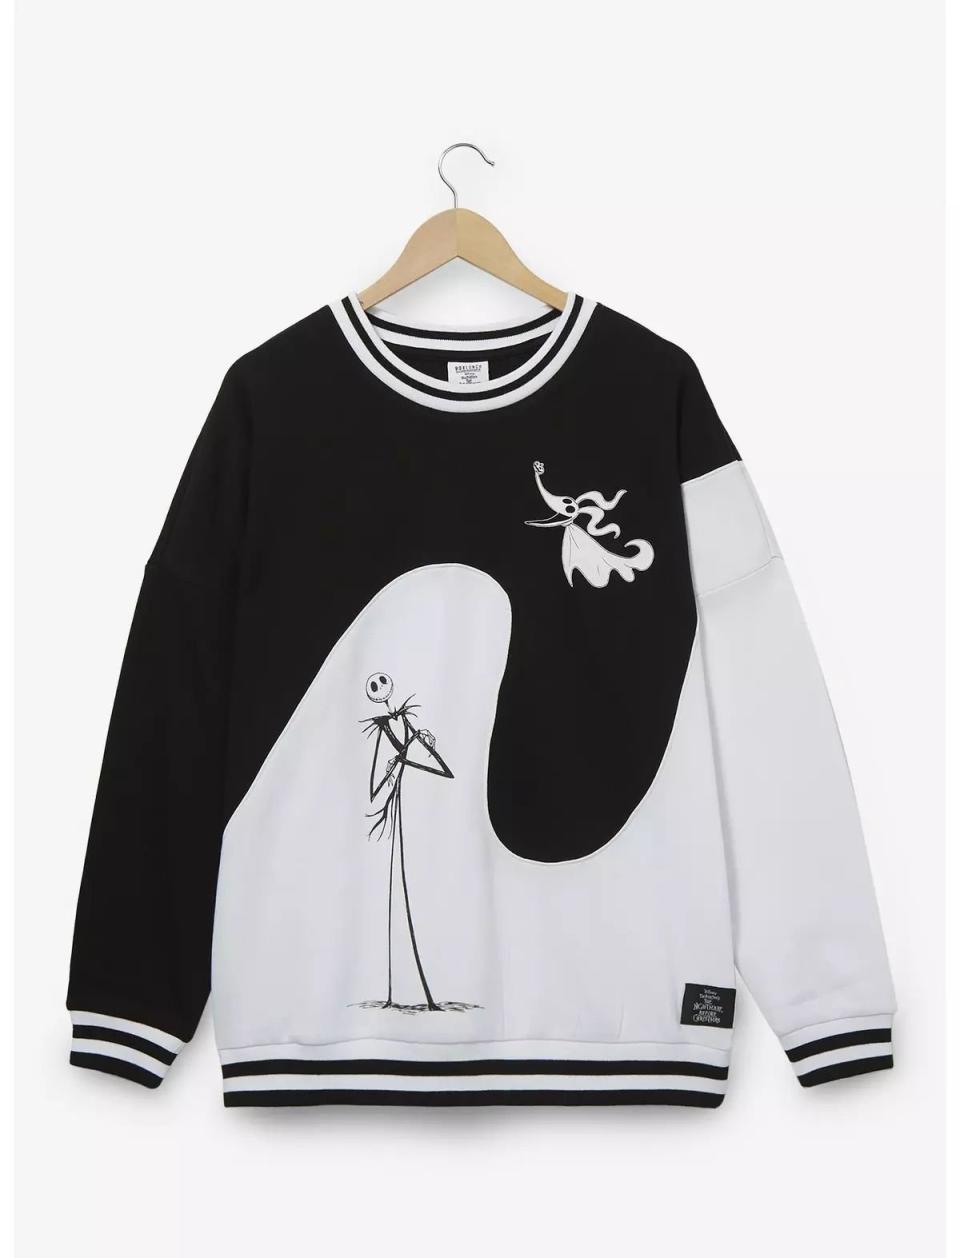 BoxLunch Nightmare Before Christmas 30th Anniversary Collection - sweater